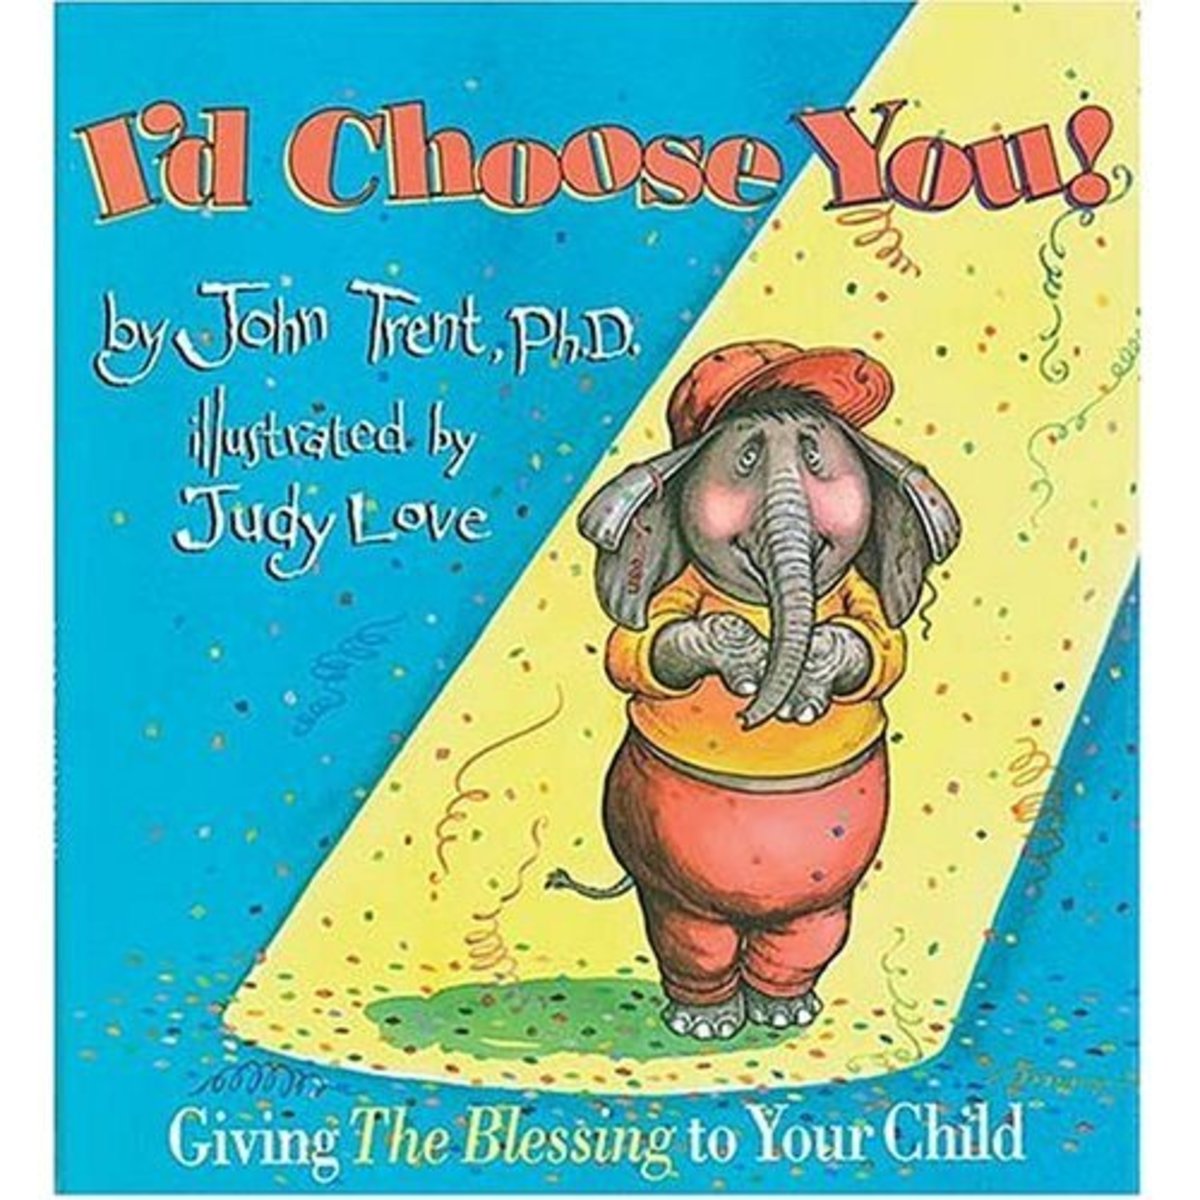 I'd Choose You by John Trent and Judy Love, a book about giving children unconditional love